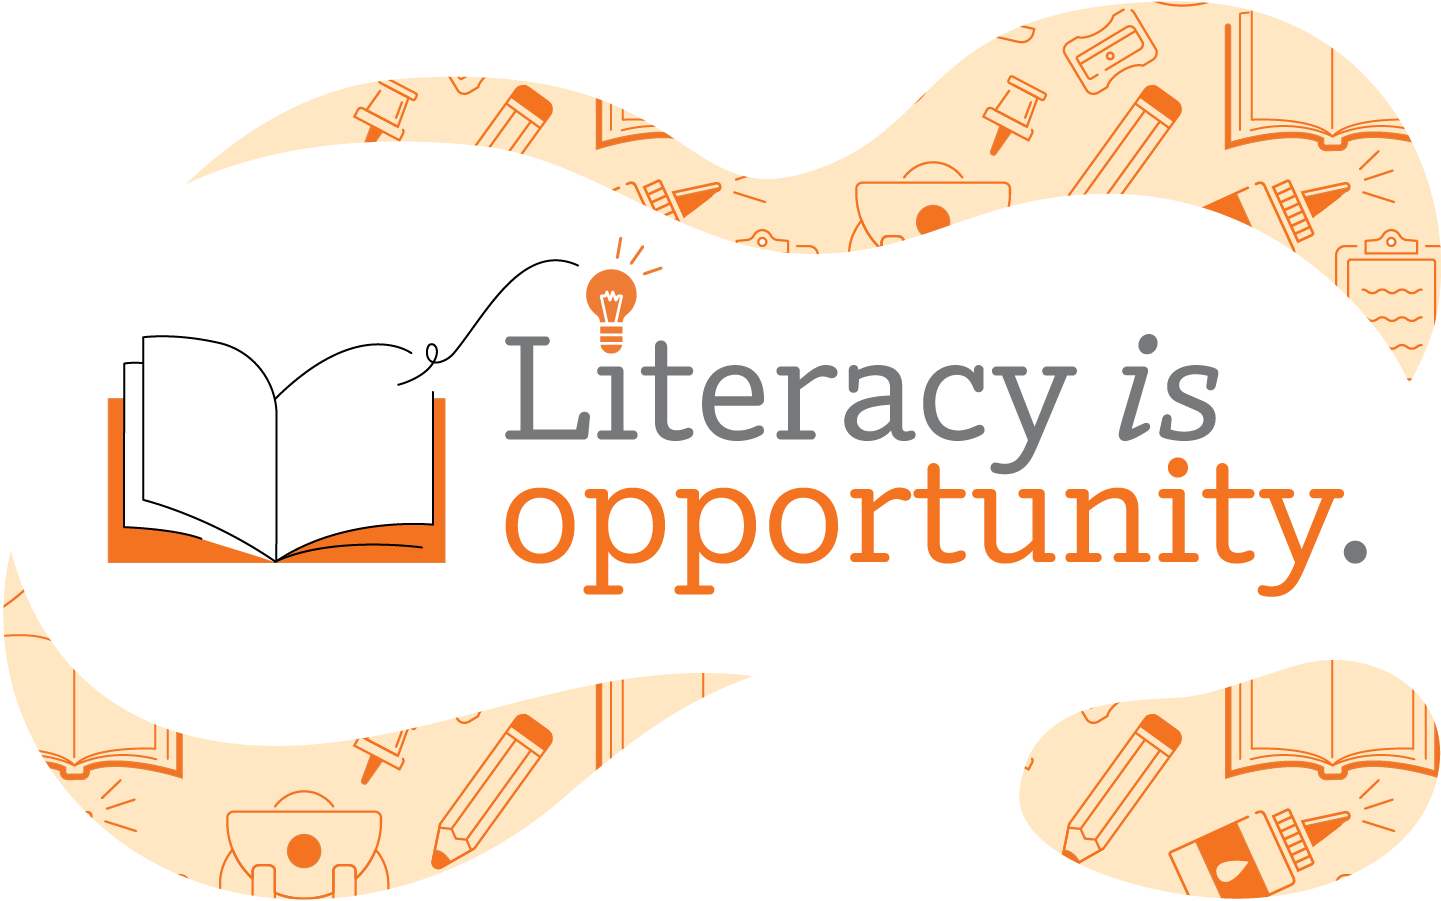 A_Literacy-is-Opportunity_Landing-Page-1